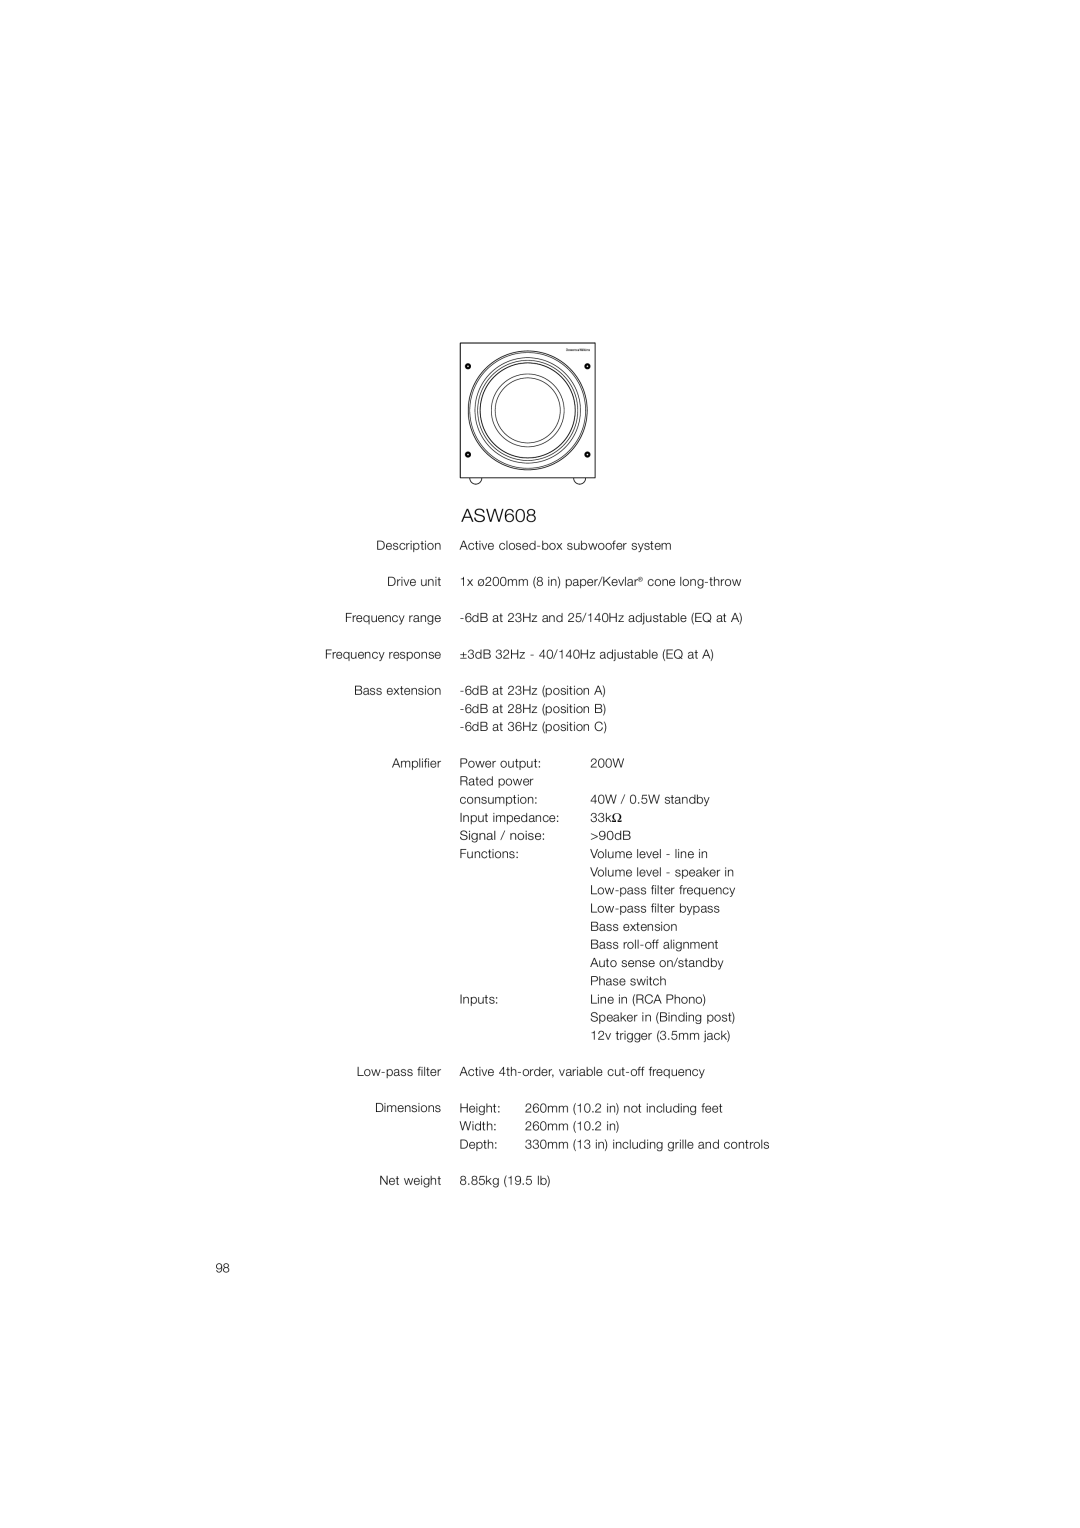 Bowers & Wilkins ASW610XP owner manual ASW608, Frequency response 